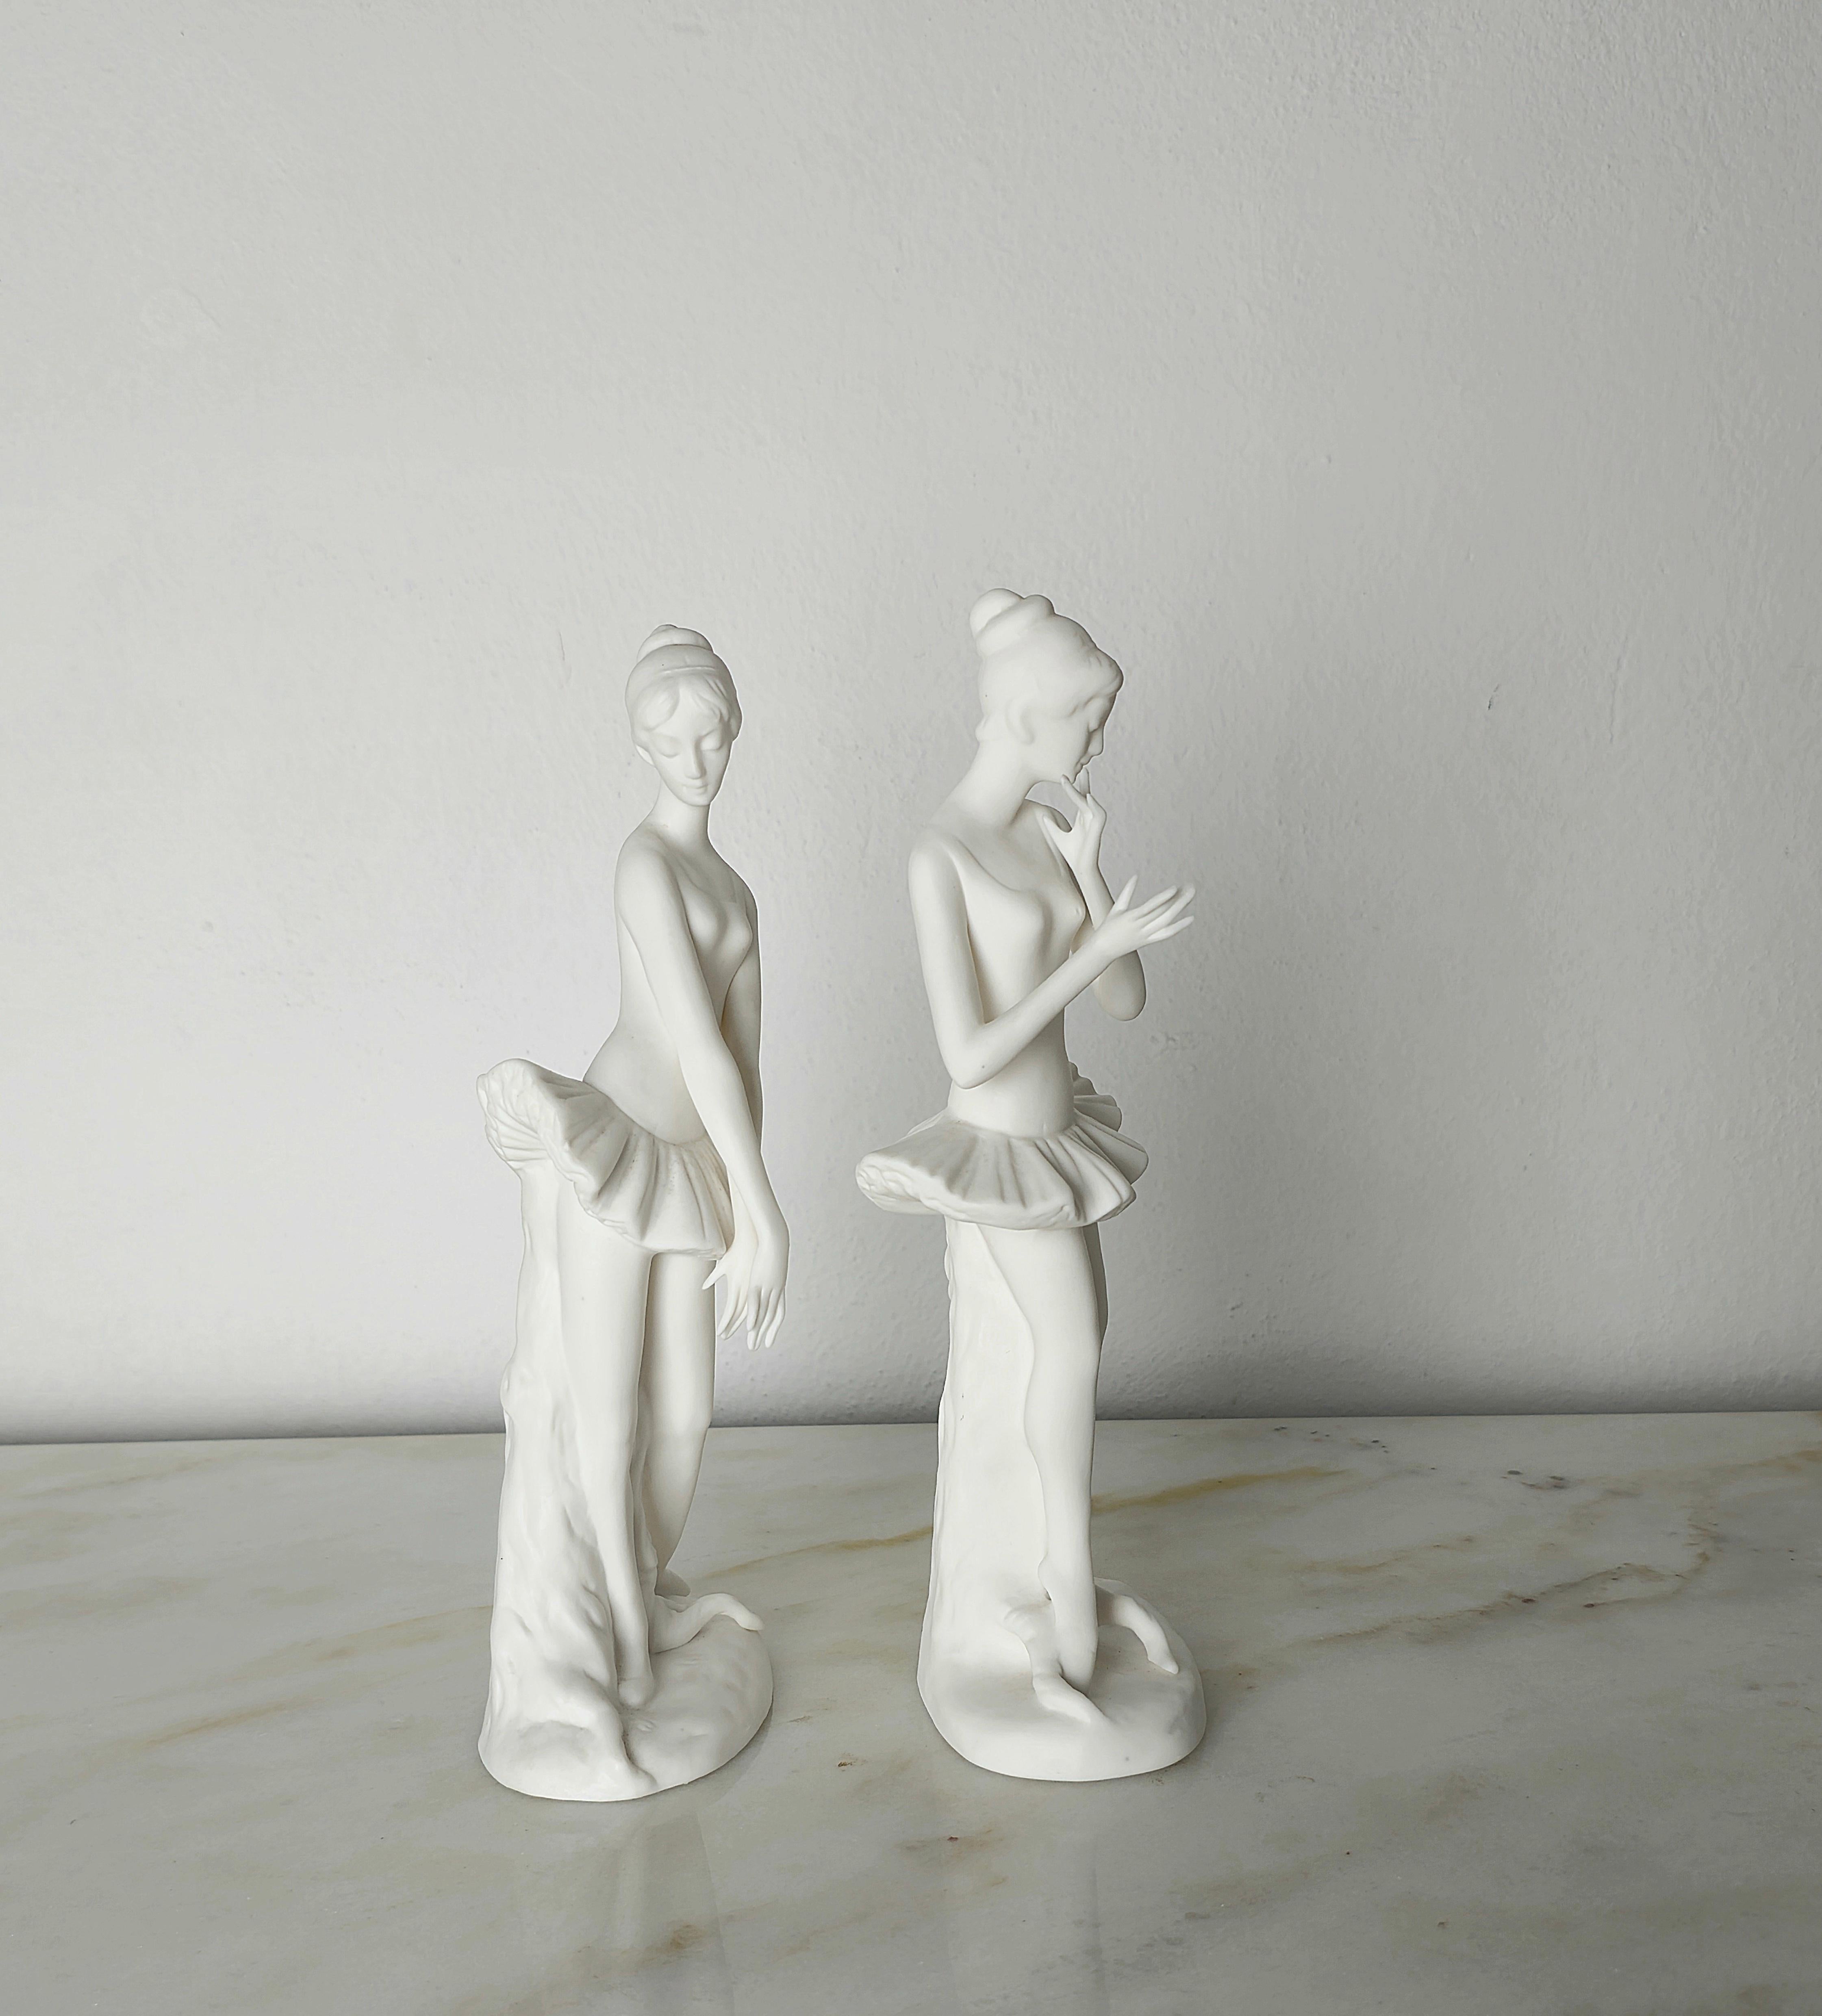 Sculptures Decorative Objects Porcelain Biscuit Midcentury Italy 1950s Set of 2 For Sale 1